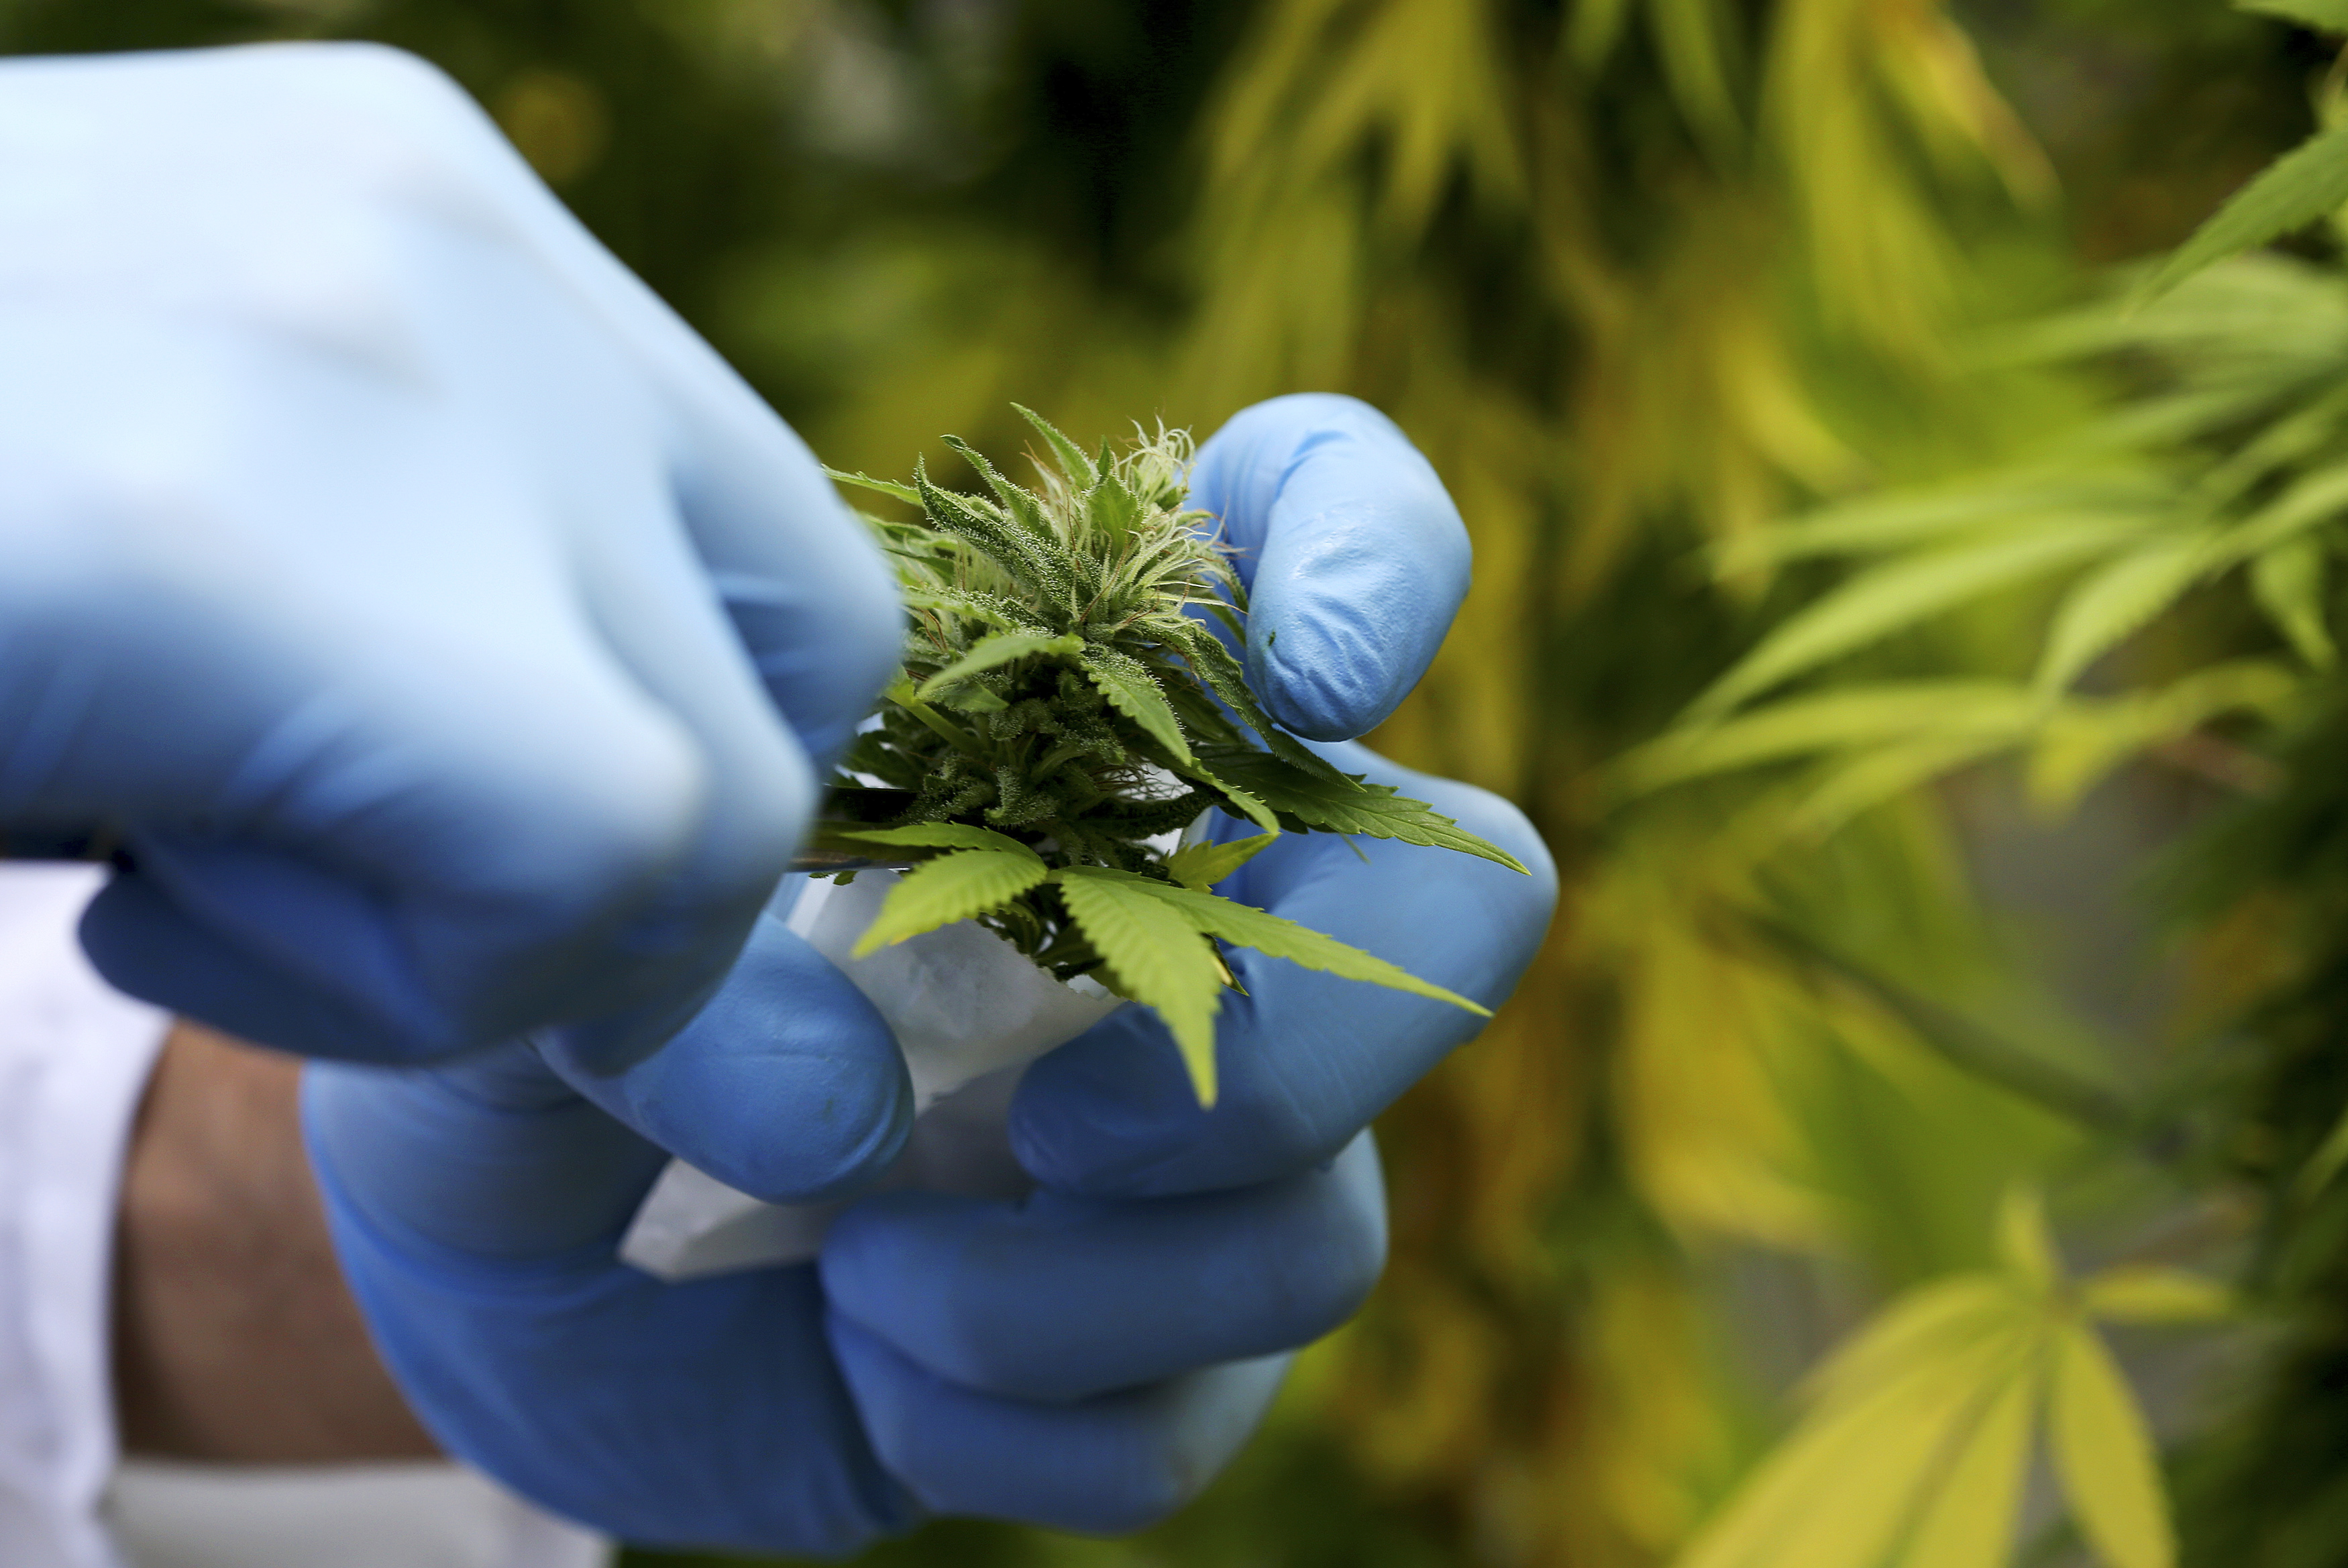 A production assistant collects a Cannabis plant in a state-owned agricultural farm in Rovigo